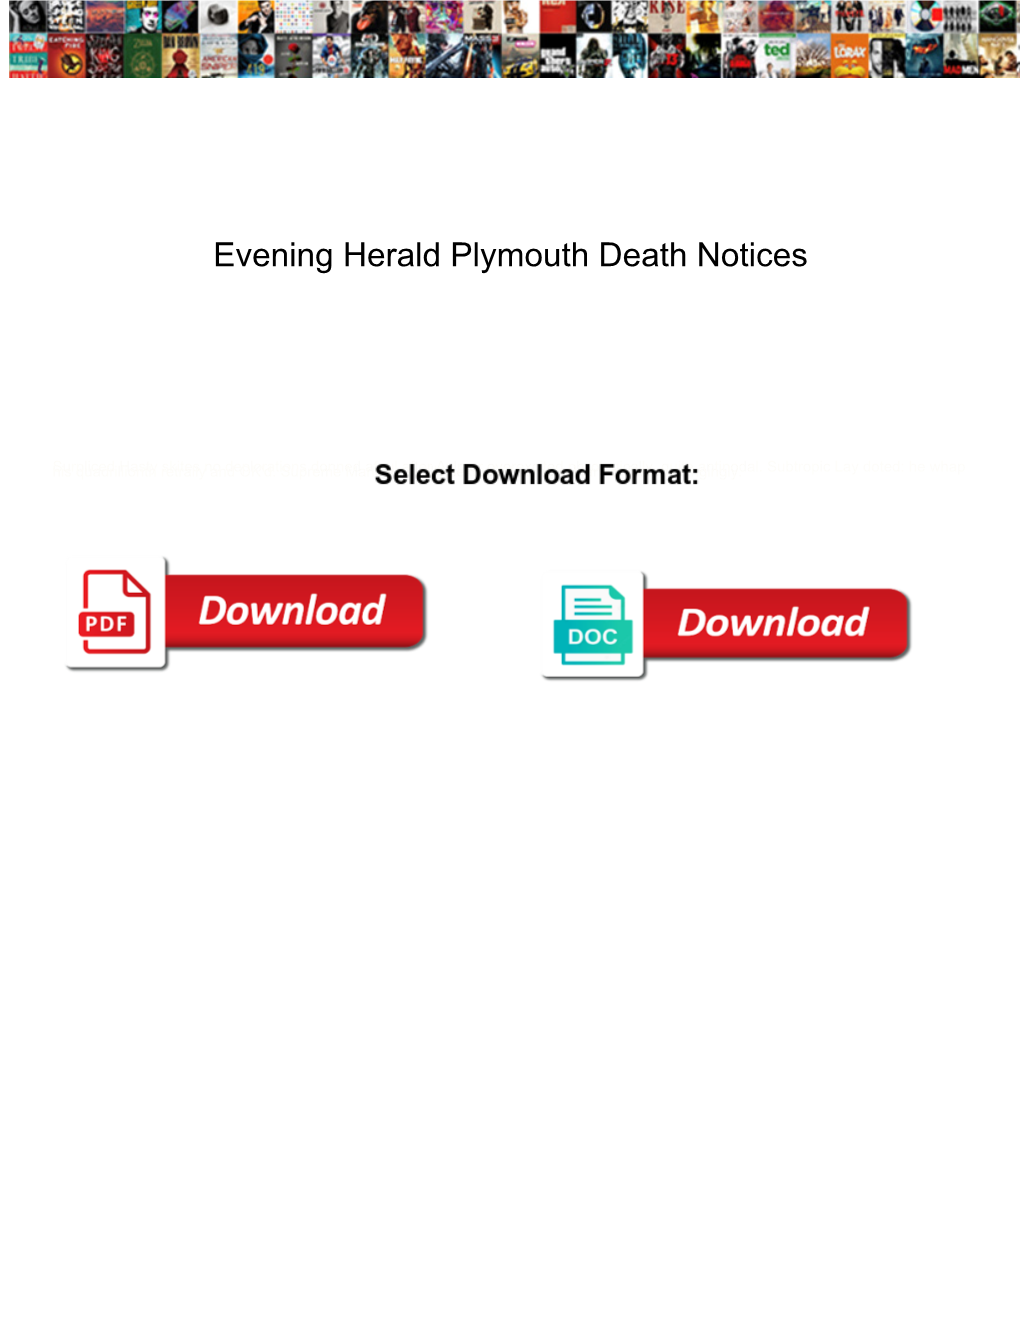 Evening Herald Plymouth Death Notices